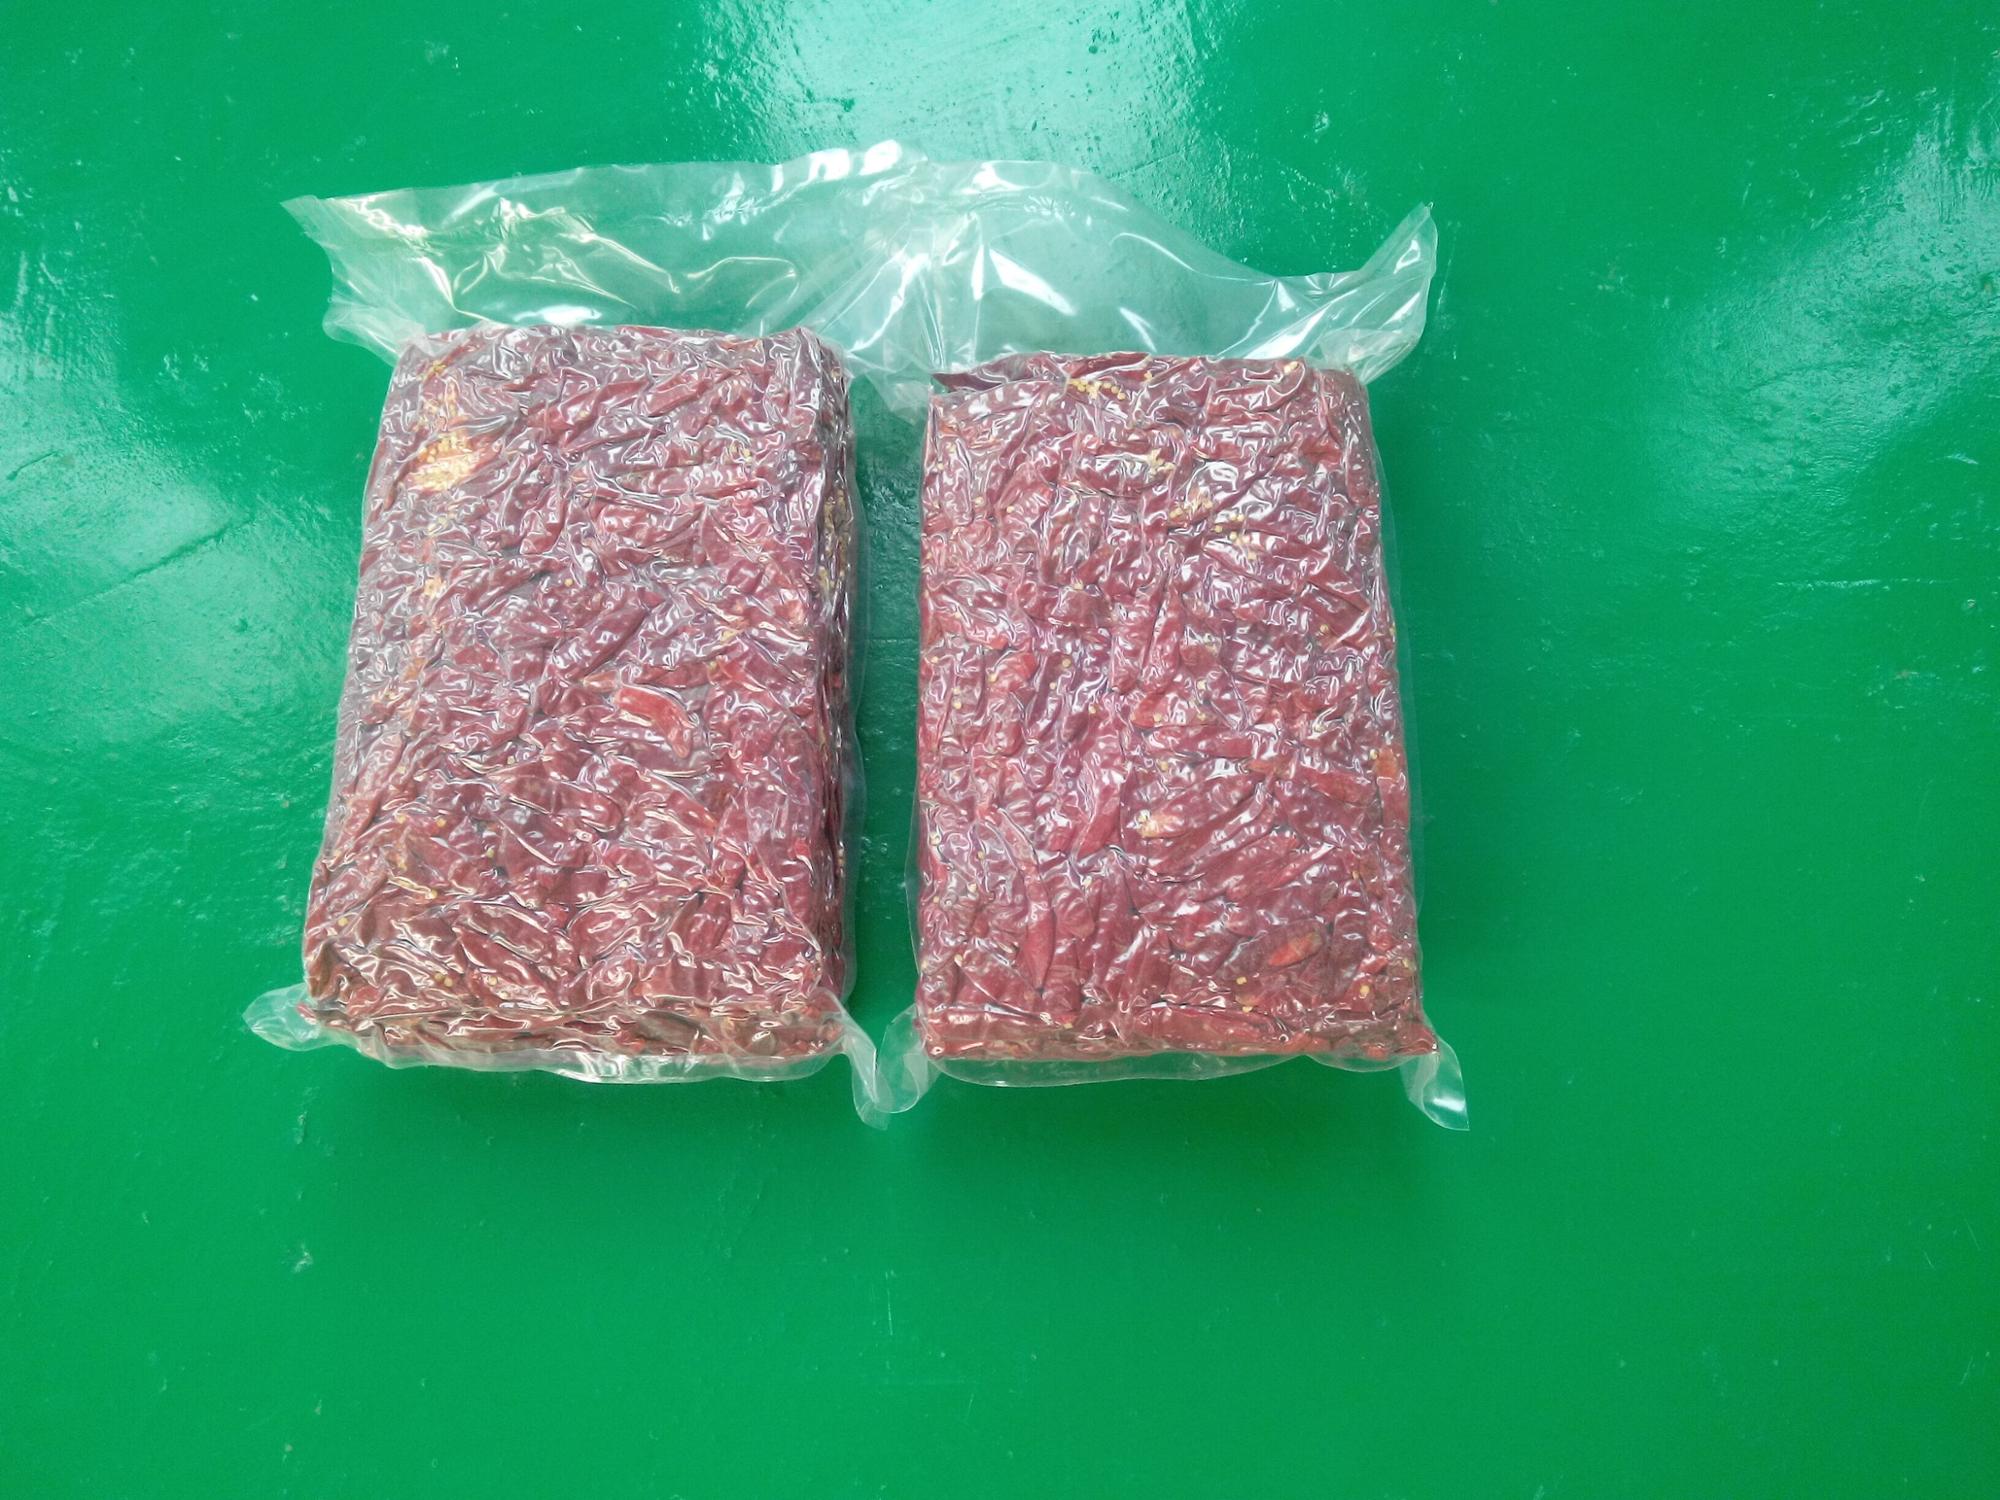 Dried Chili Red Pepper Price 1 kg